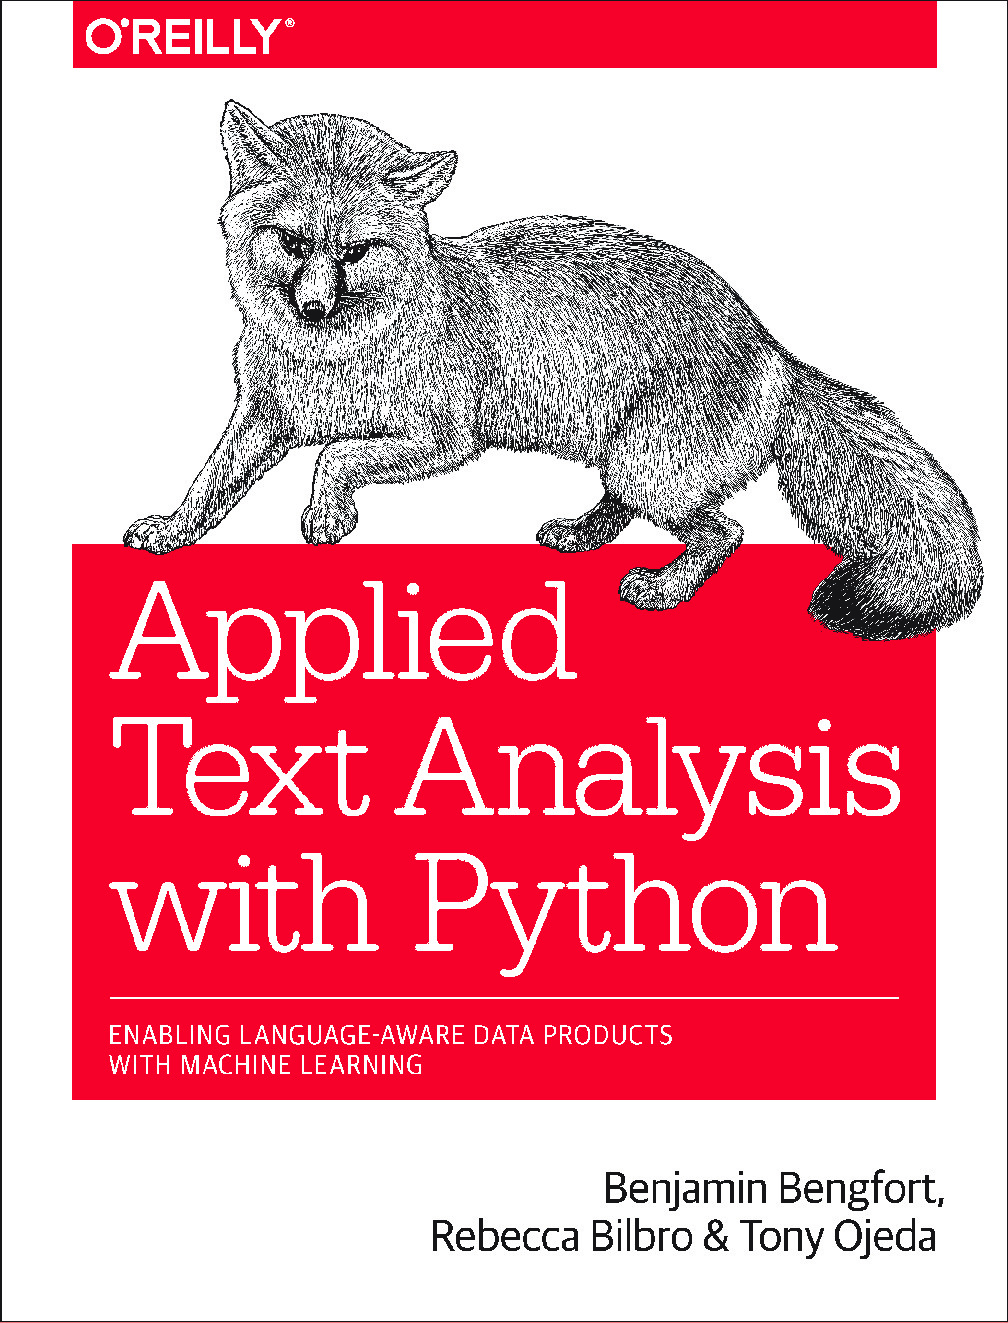 Applied Text Analysis with Python – Enabling Language Aware Data Products with Machine Learning